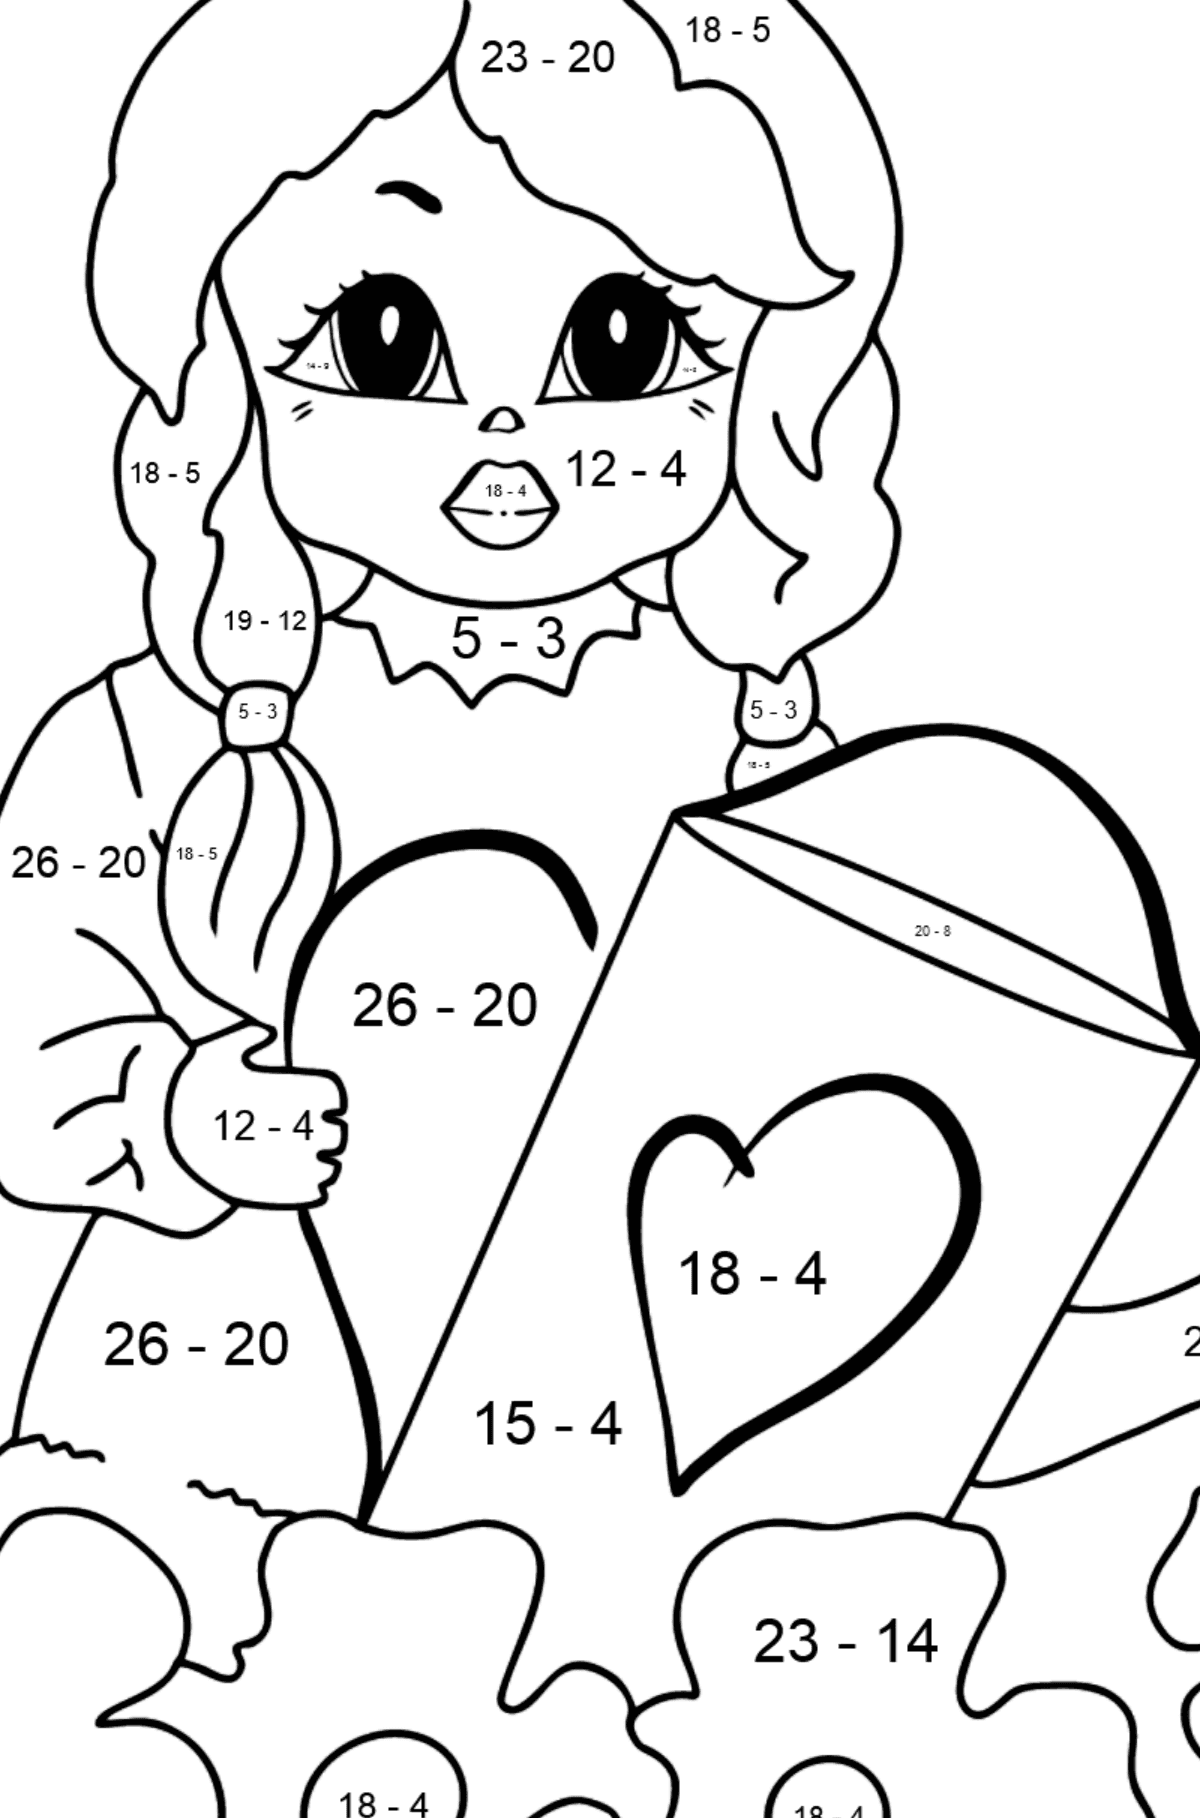 Coloring Page - A Princess with a Watering Can - Math Coloring - Subtraction for Kids